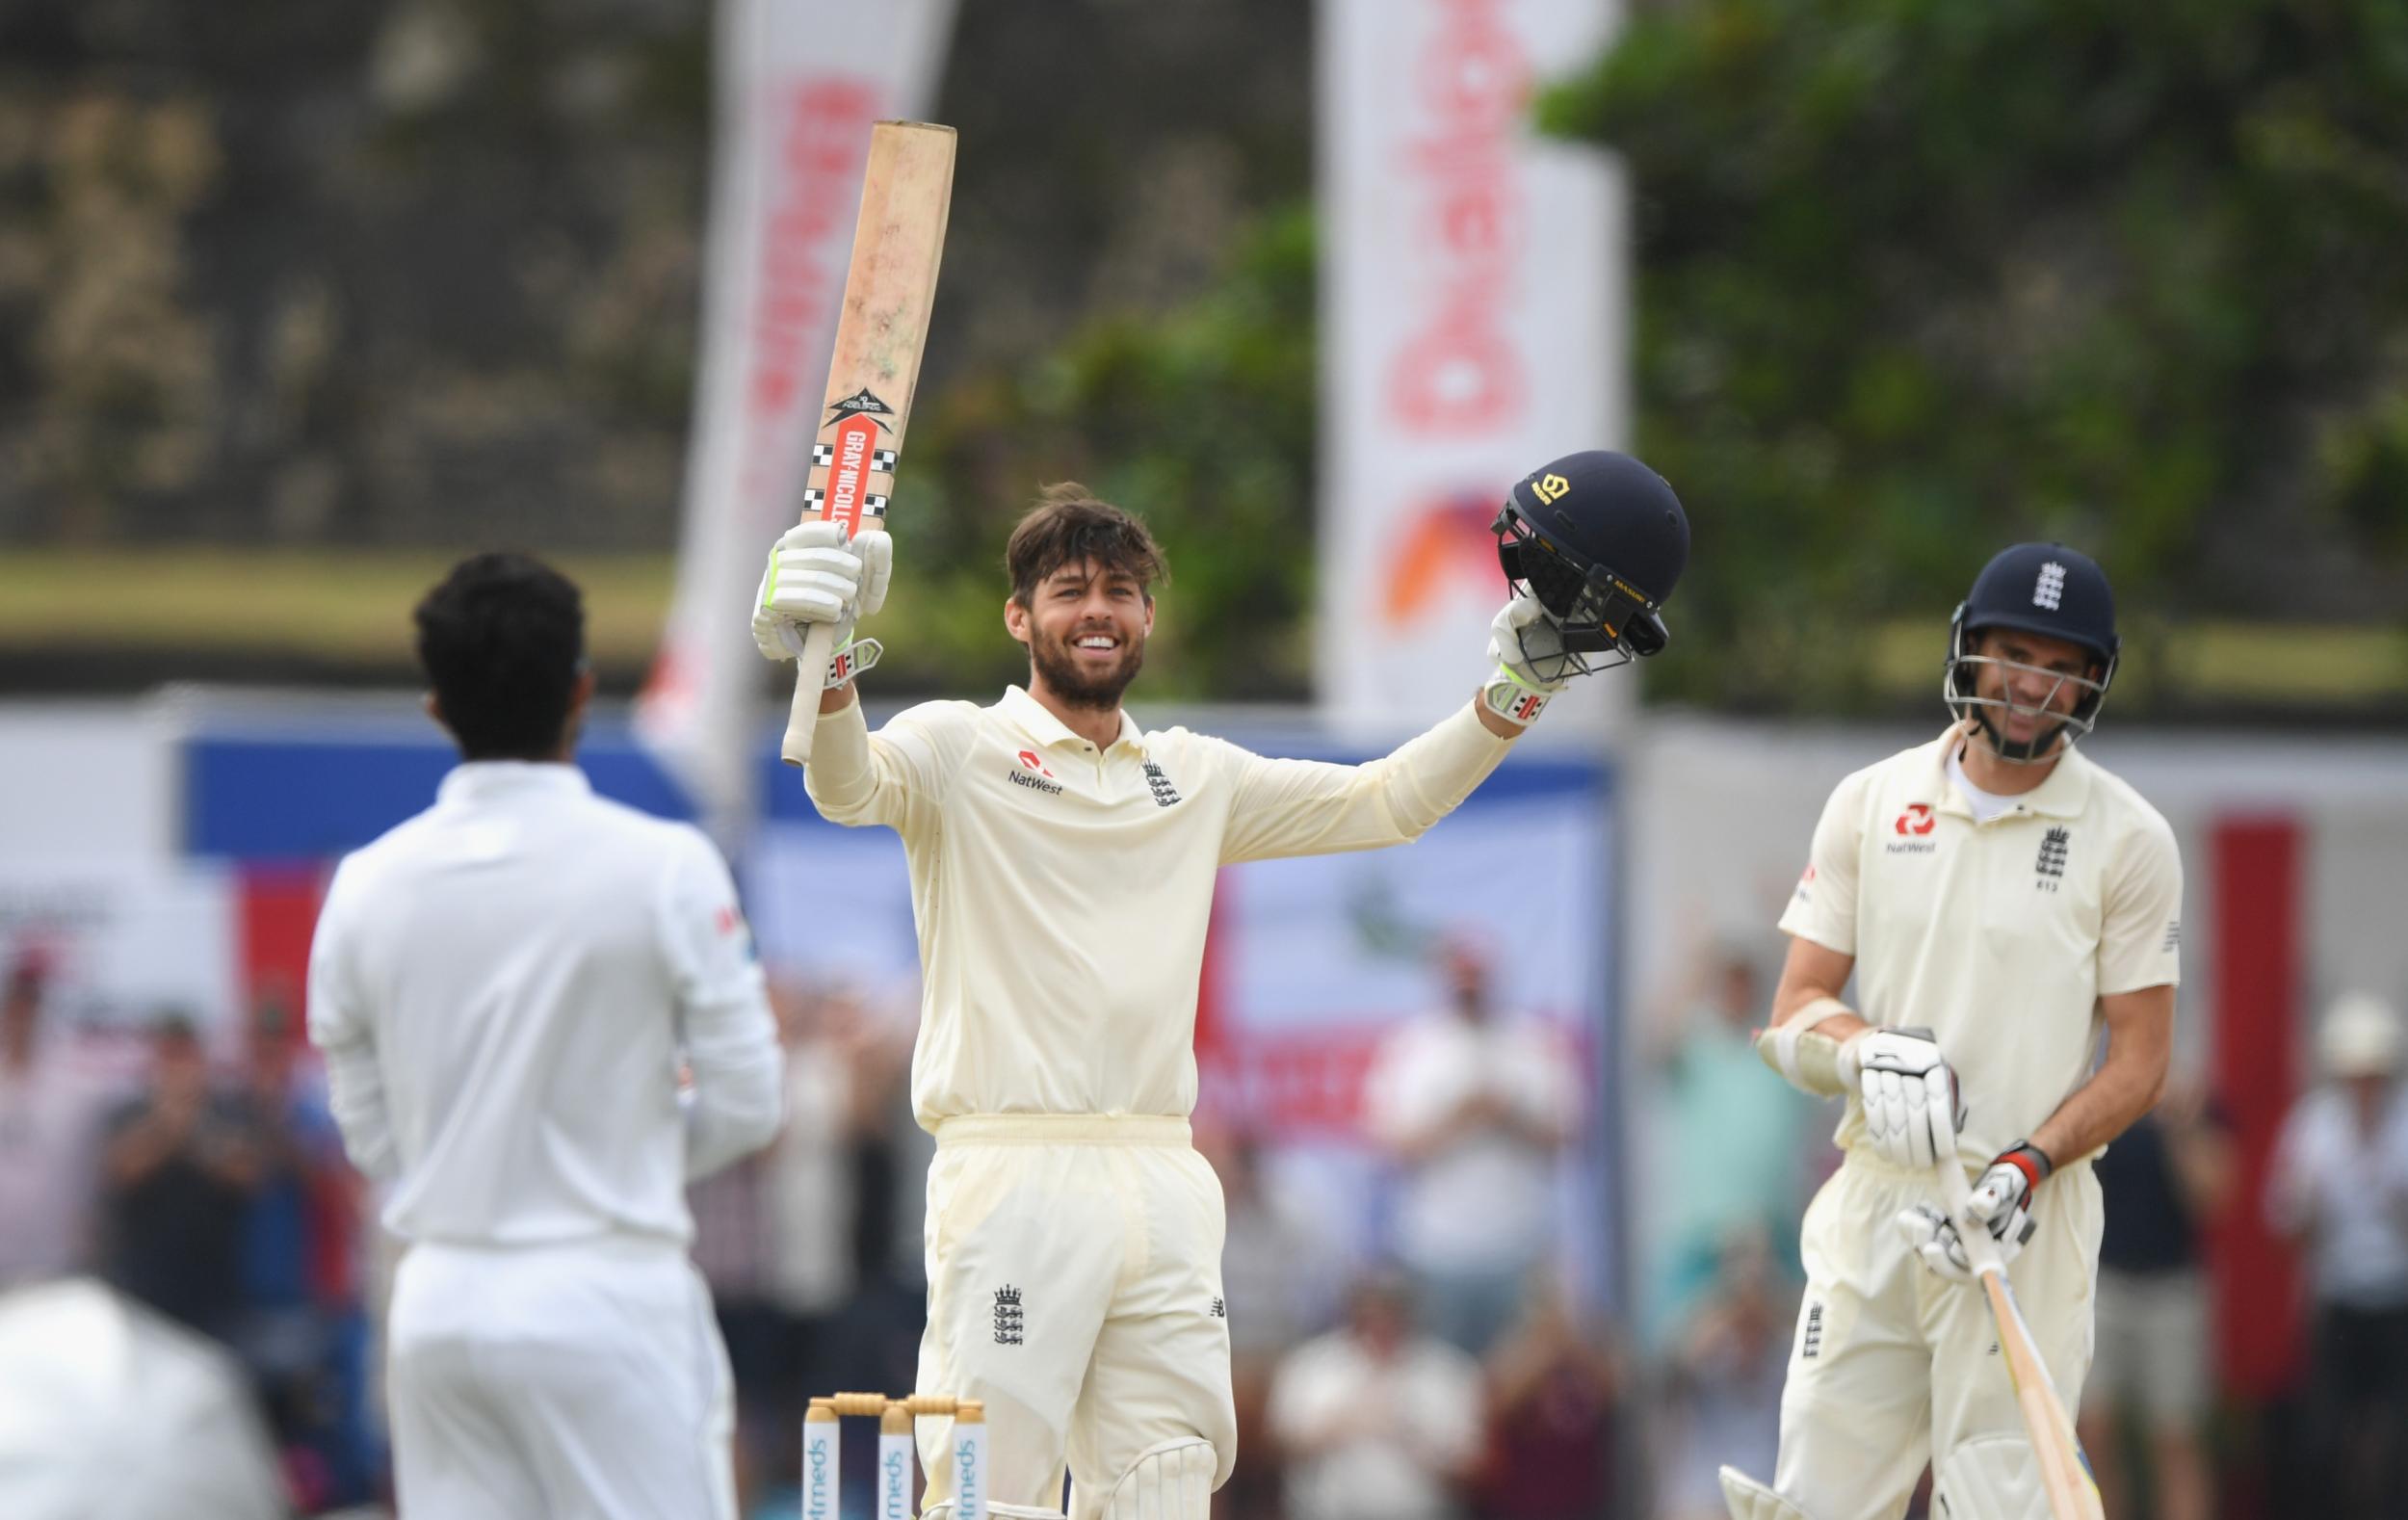 Ben Foakes celebrates a century on his Test debut for England